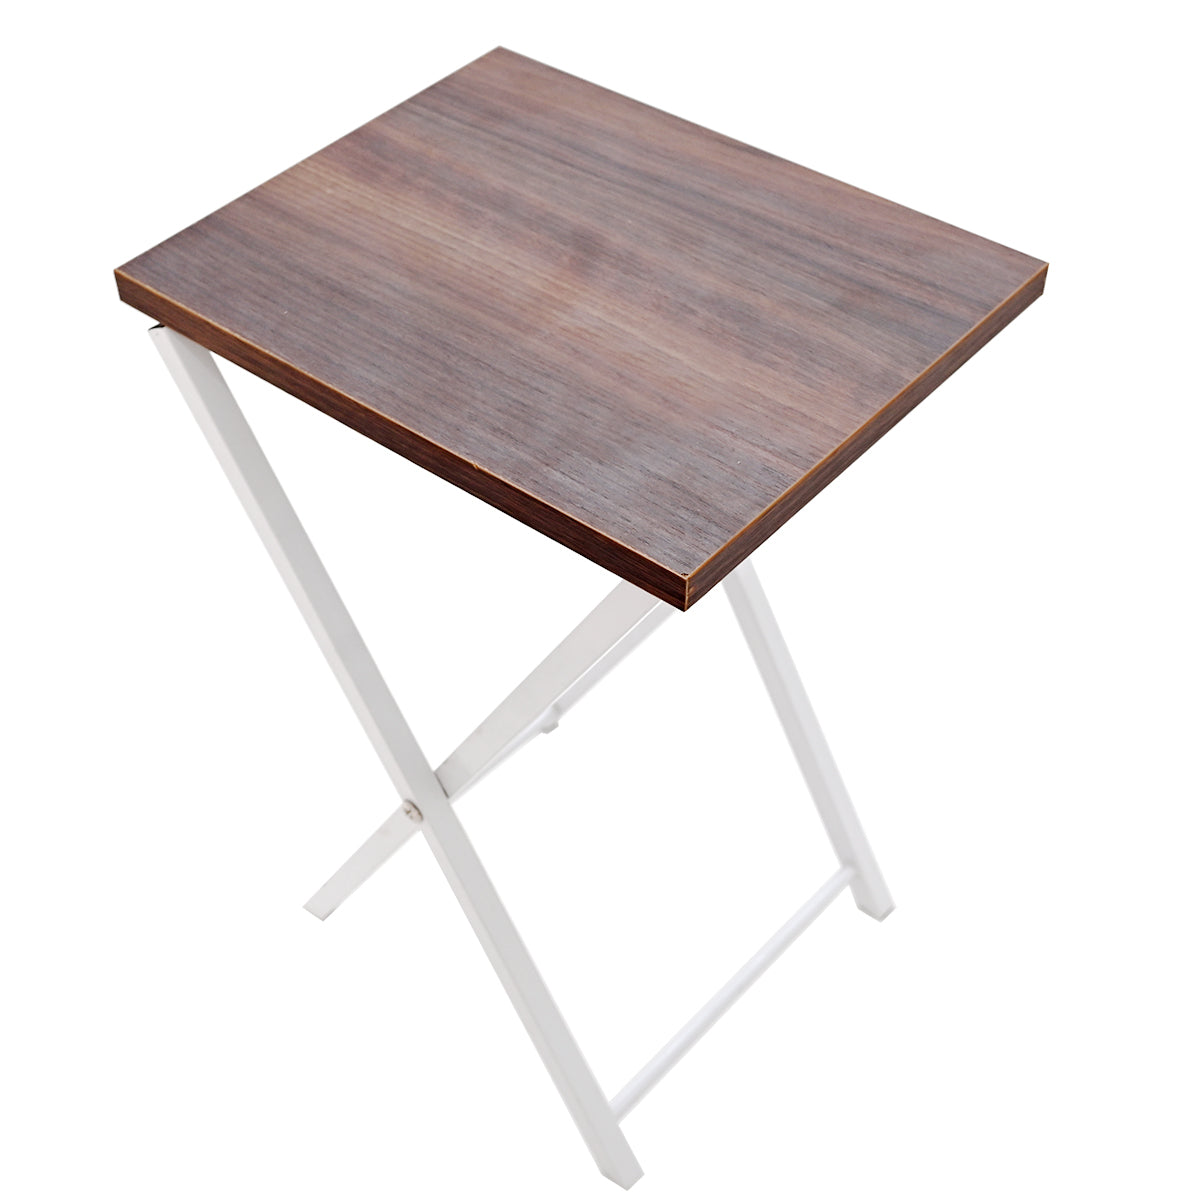 Ditmas Folding (White) Side Table